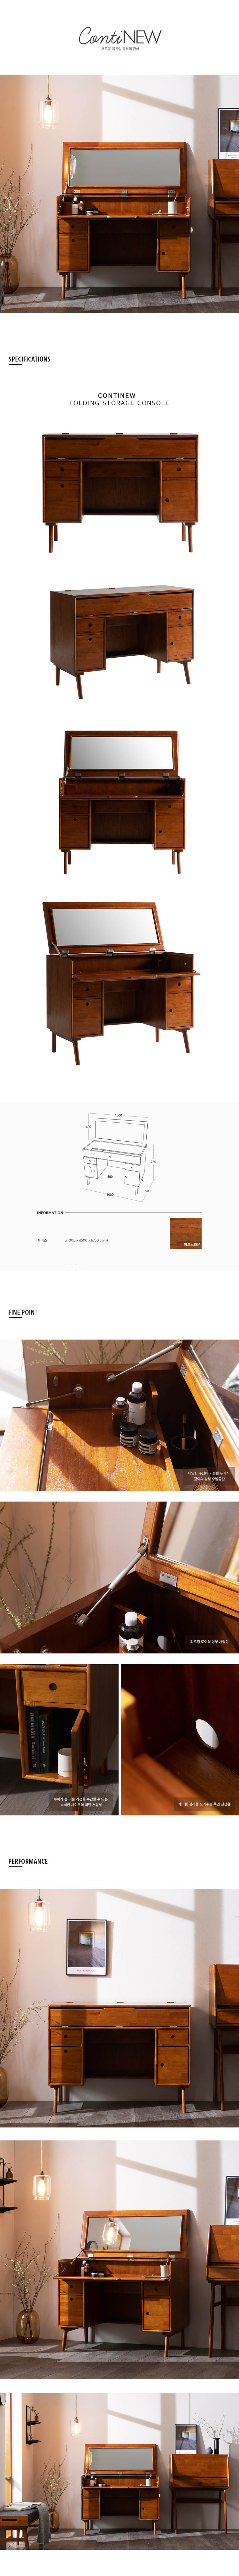 Continew_Folding_Storage_Dresser_Console_specs_by_born_in_colour